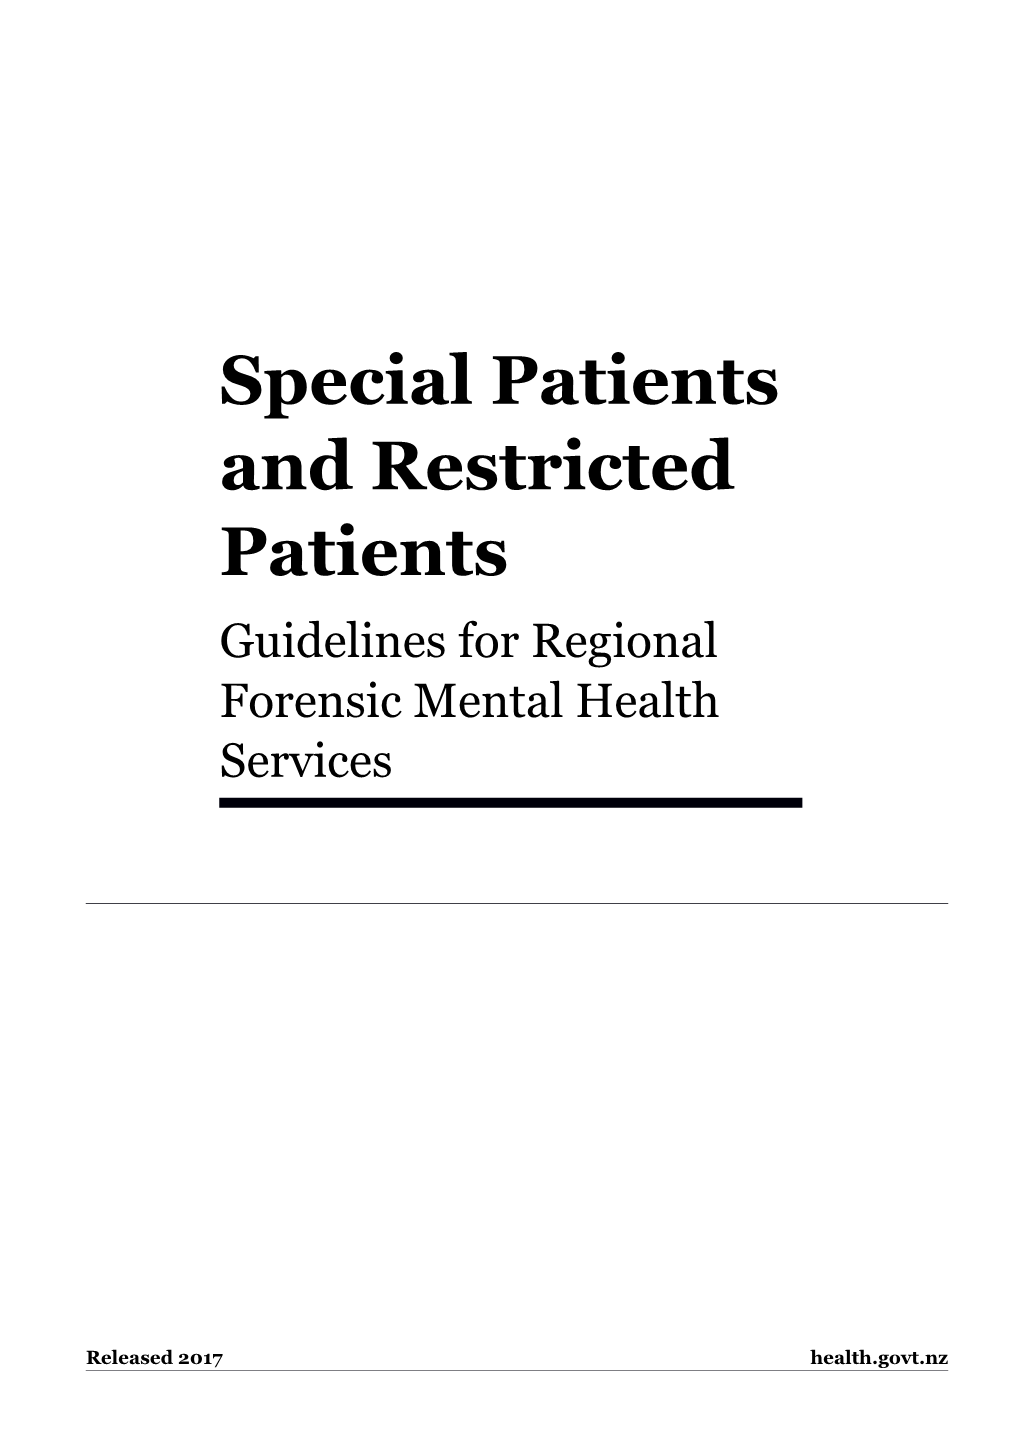 Special Patients and Restricted Patients: Guidelines for Regional Forensic Mental Health